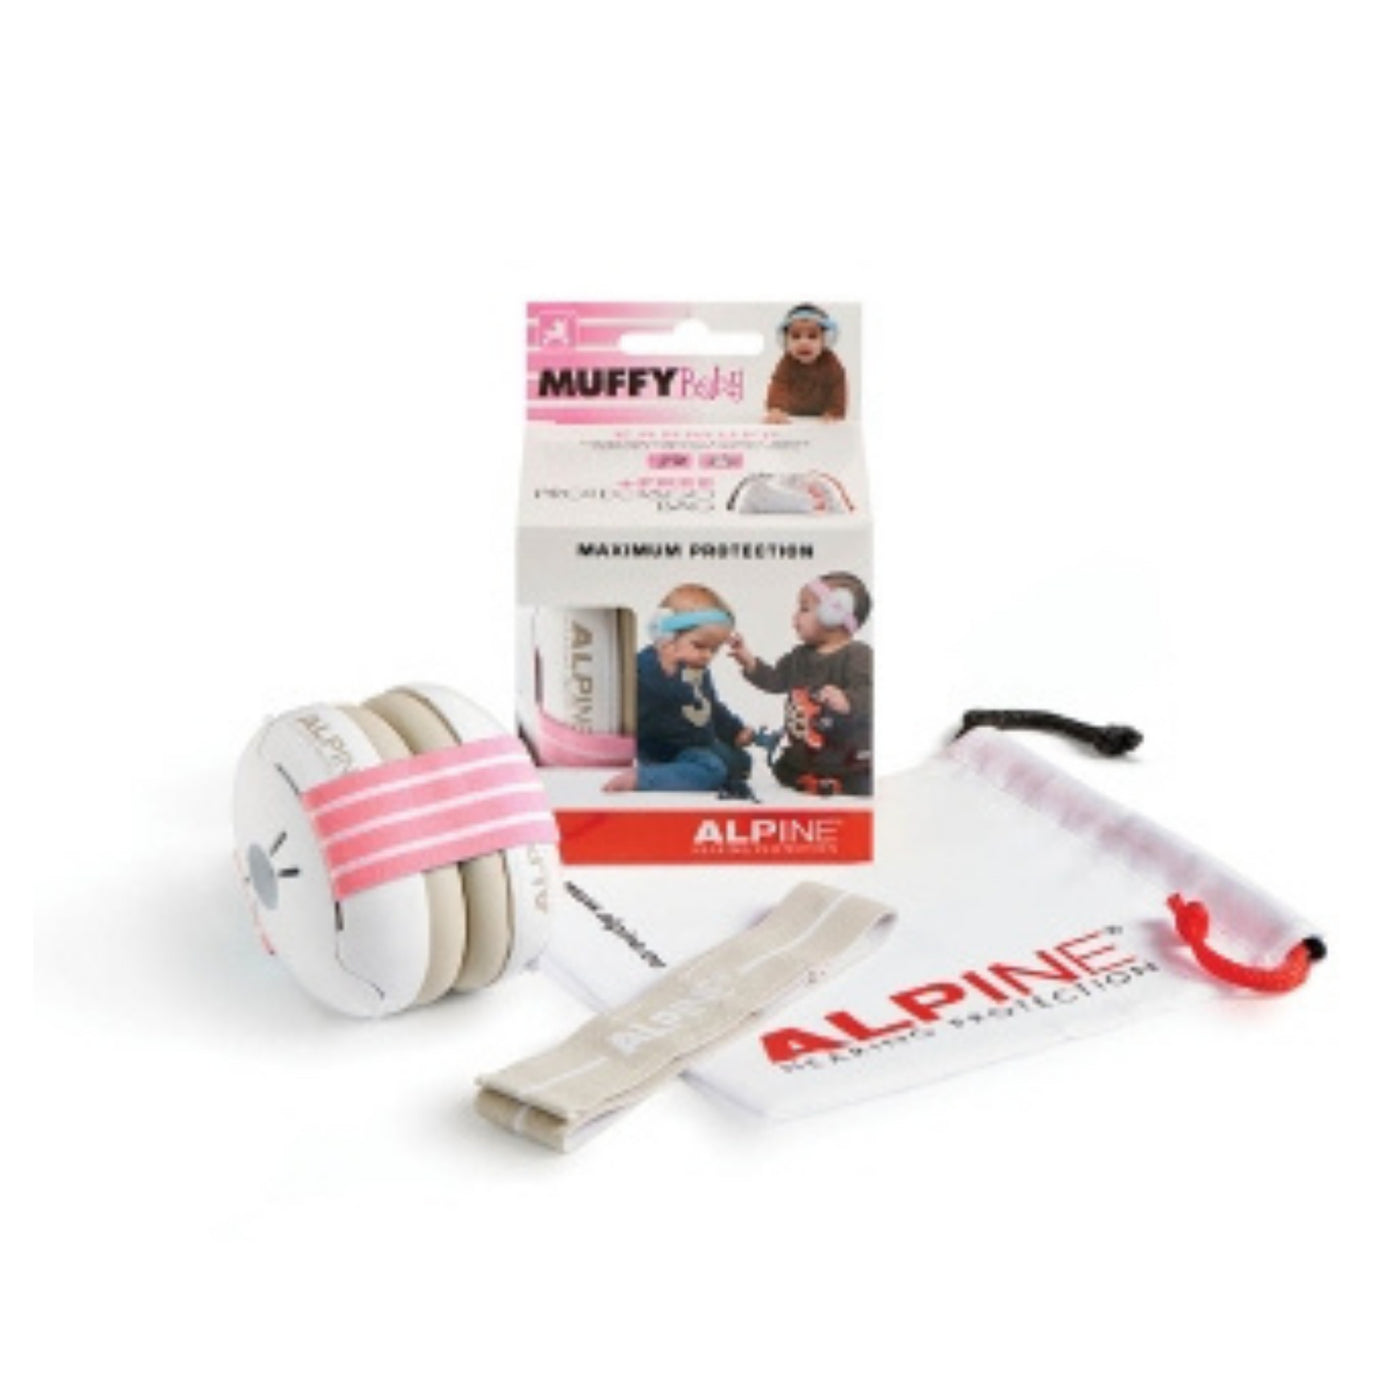 Alpine Hearing Protection Muffy Baby Protective Headphones, Pink